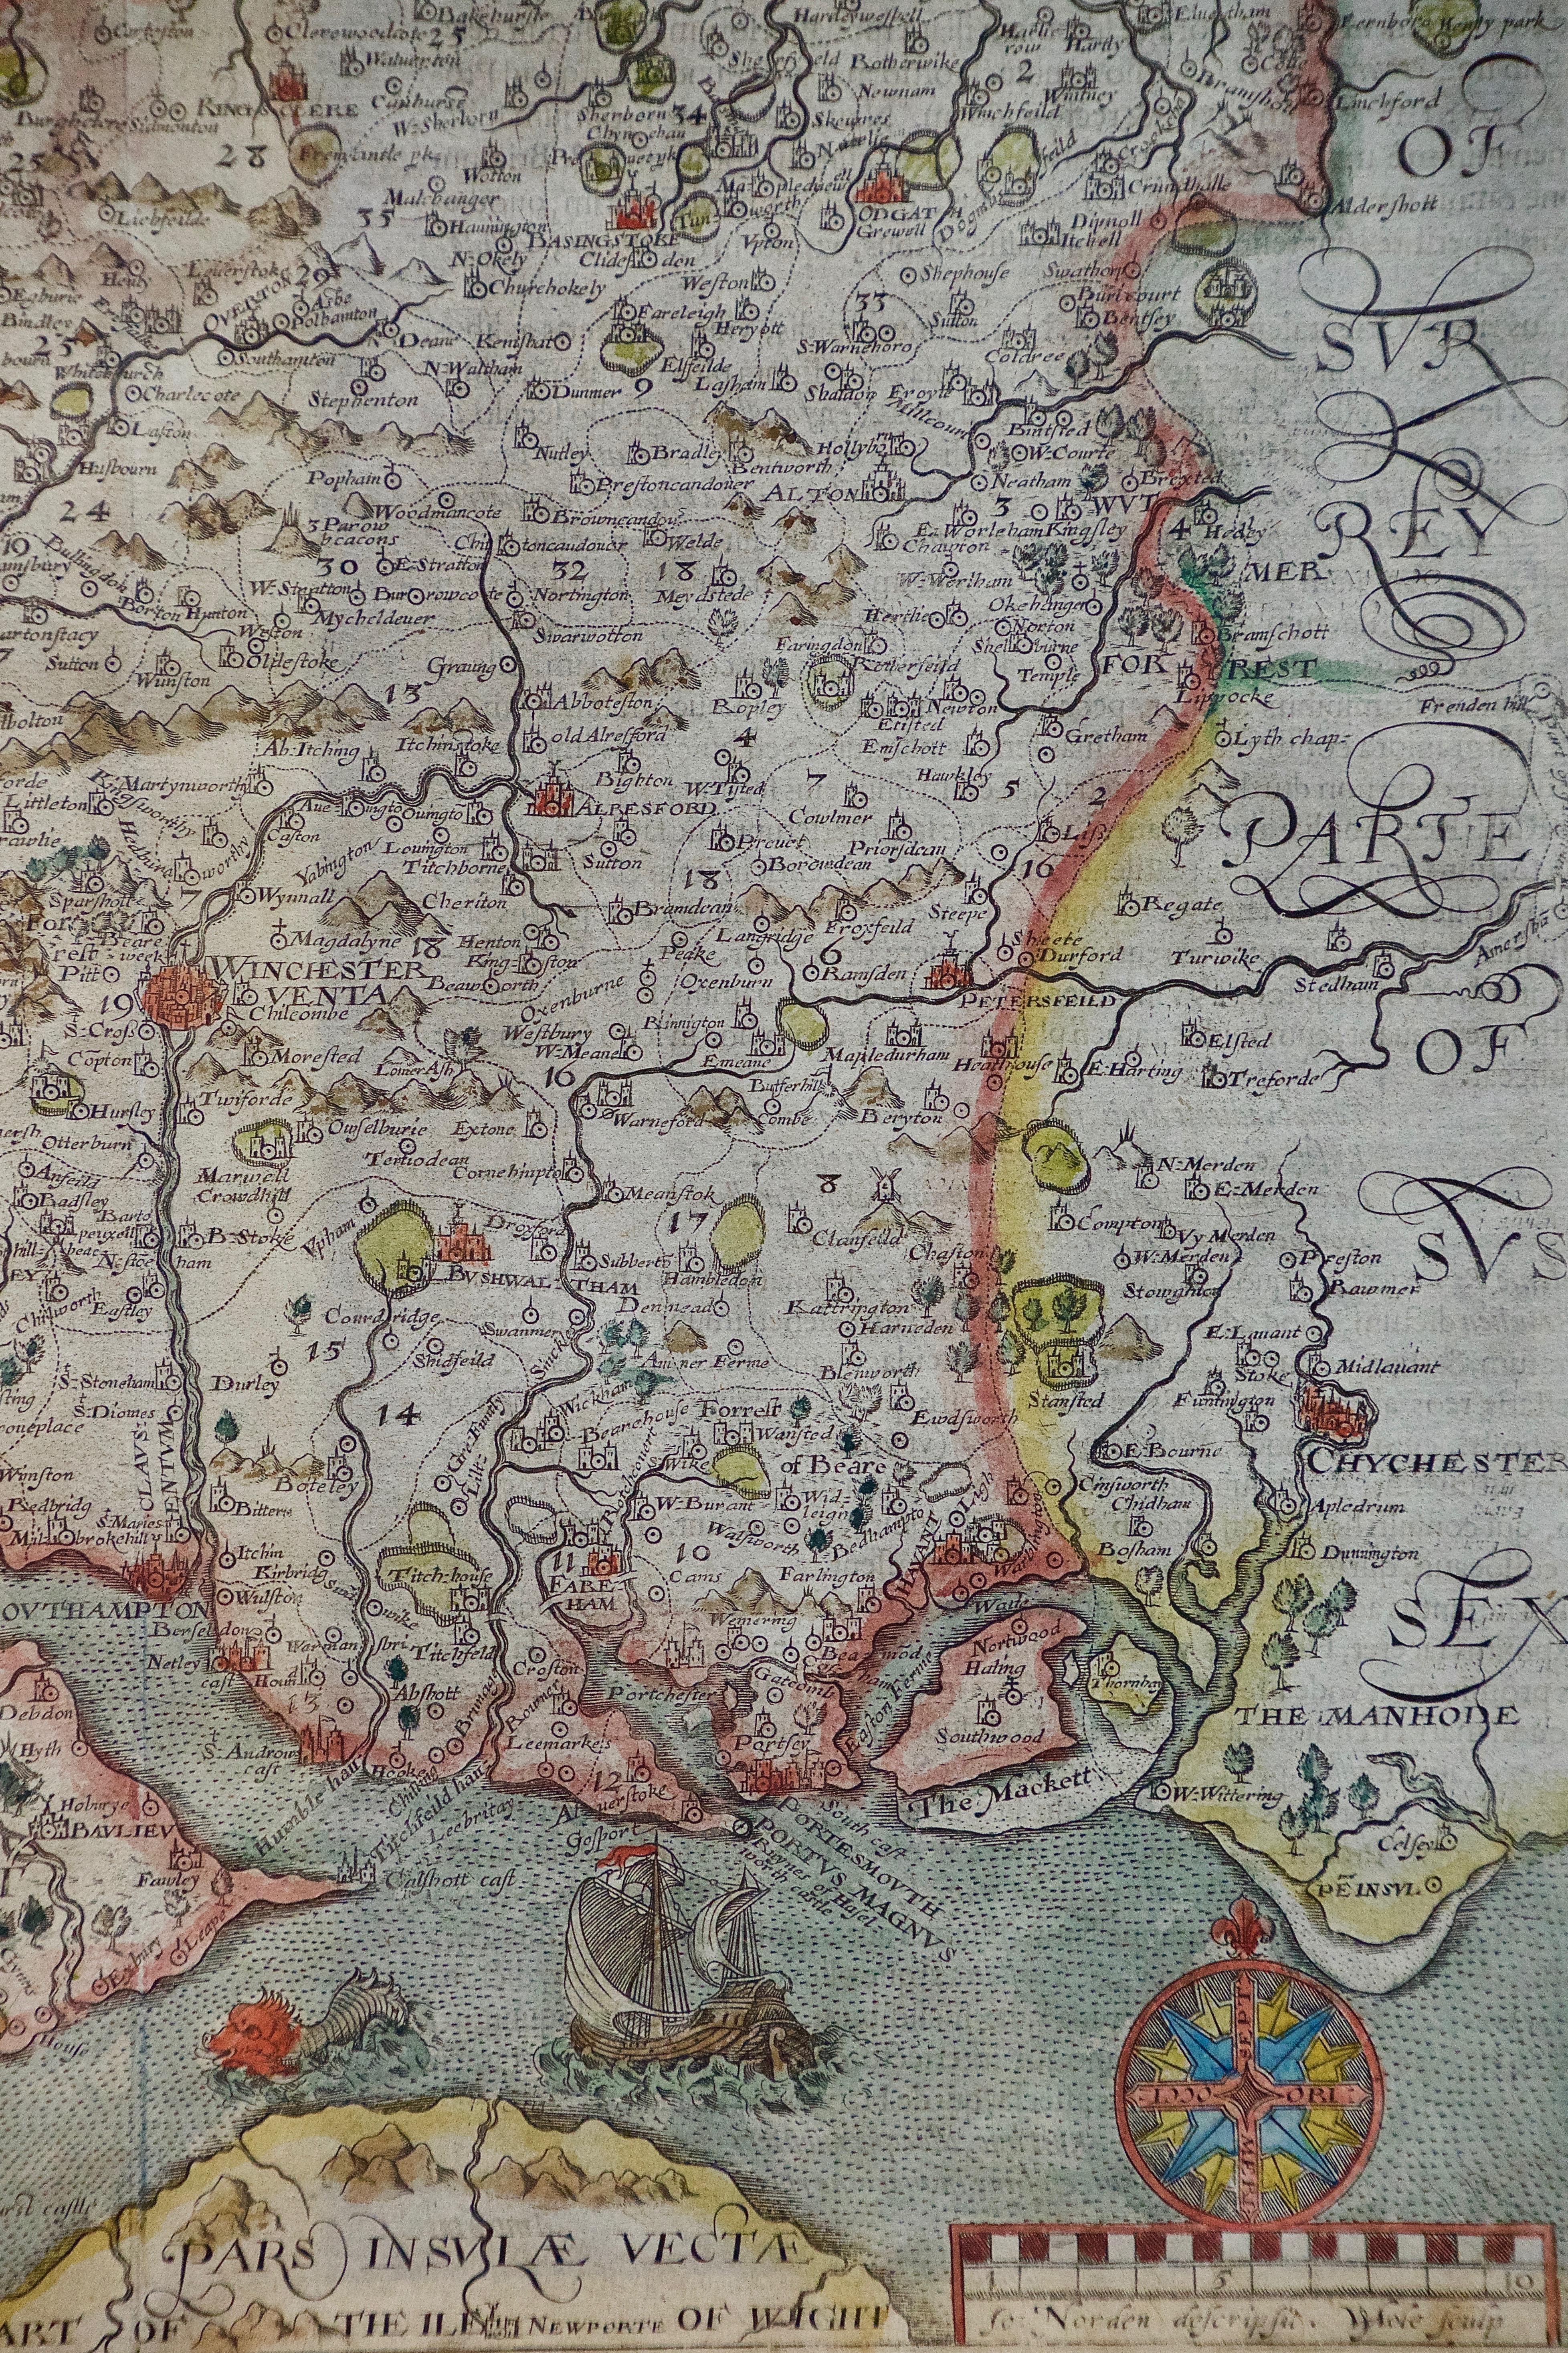 An early hand-colored map of Britain's Hampshire county, published in the 1607 edition of William Camden's great historical description of the British Isles, 